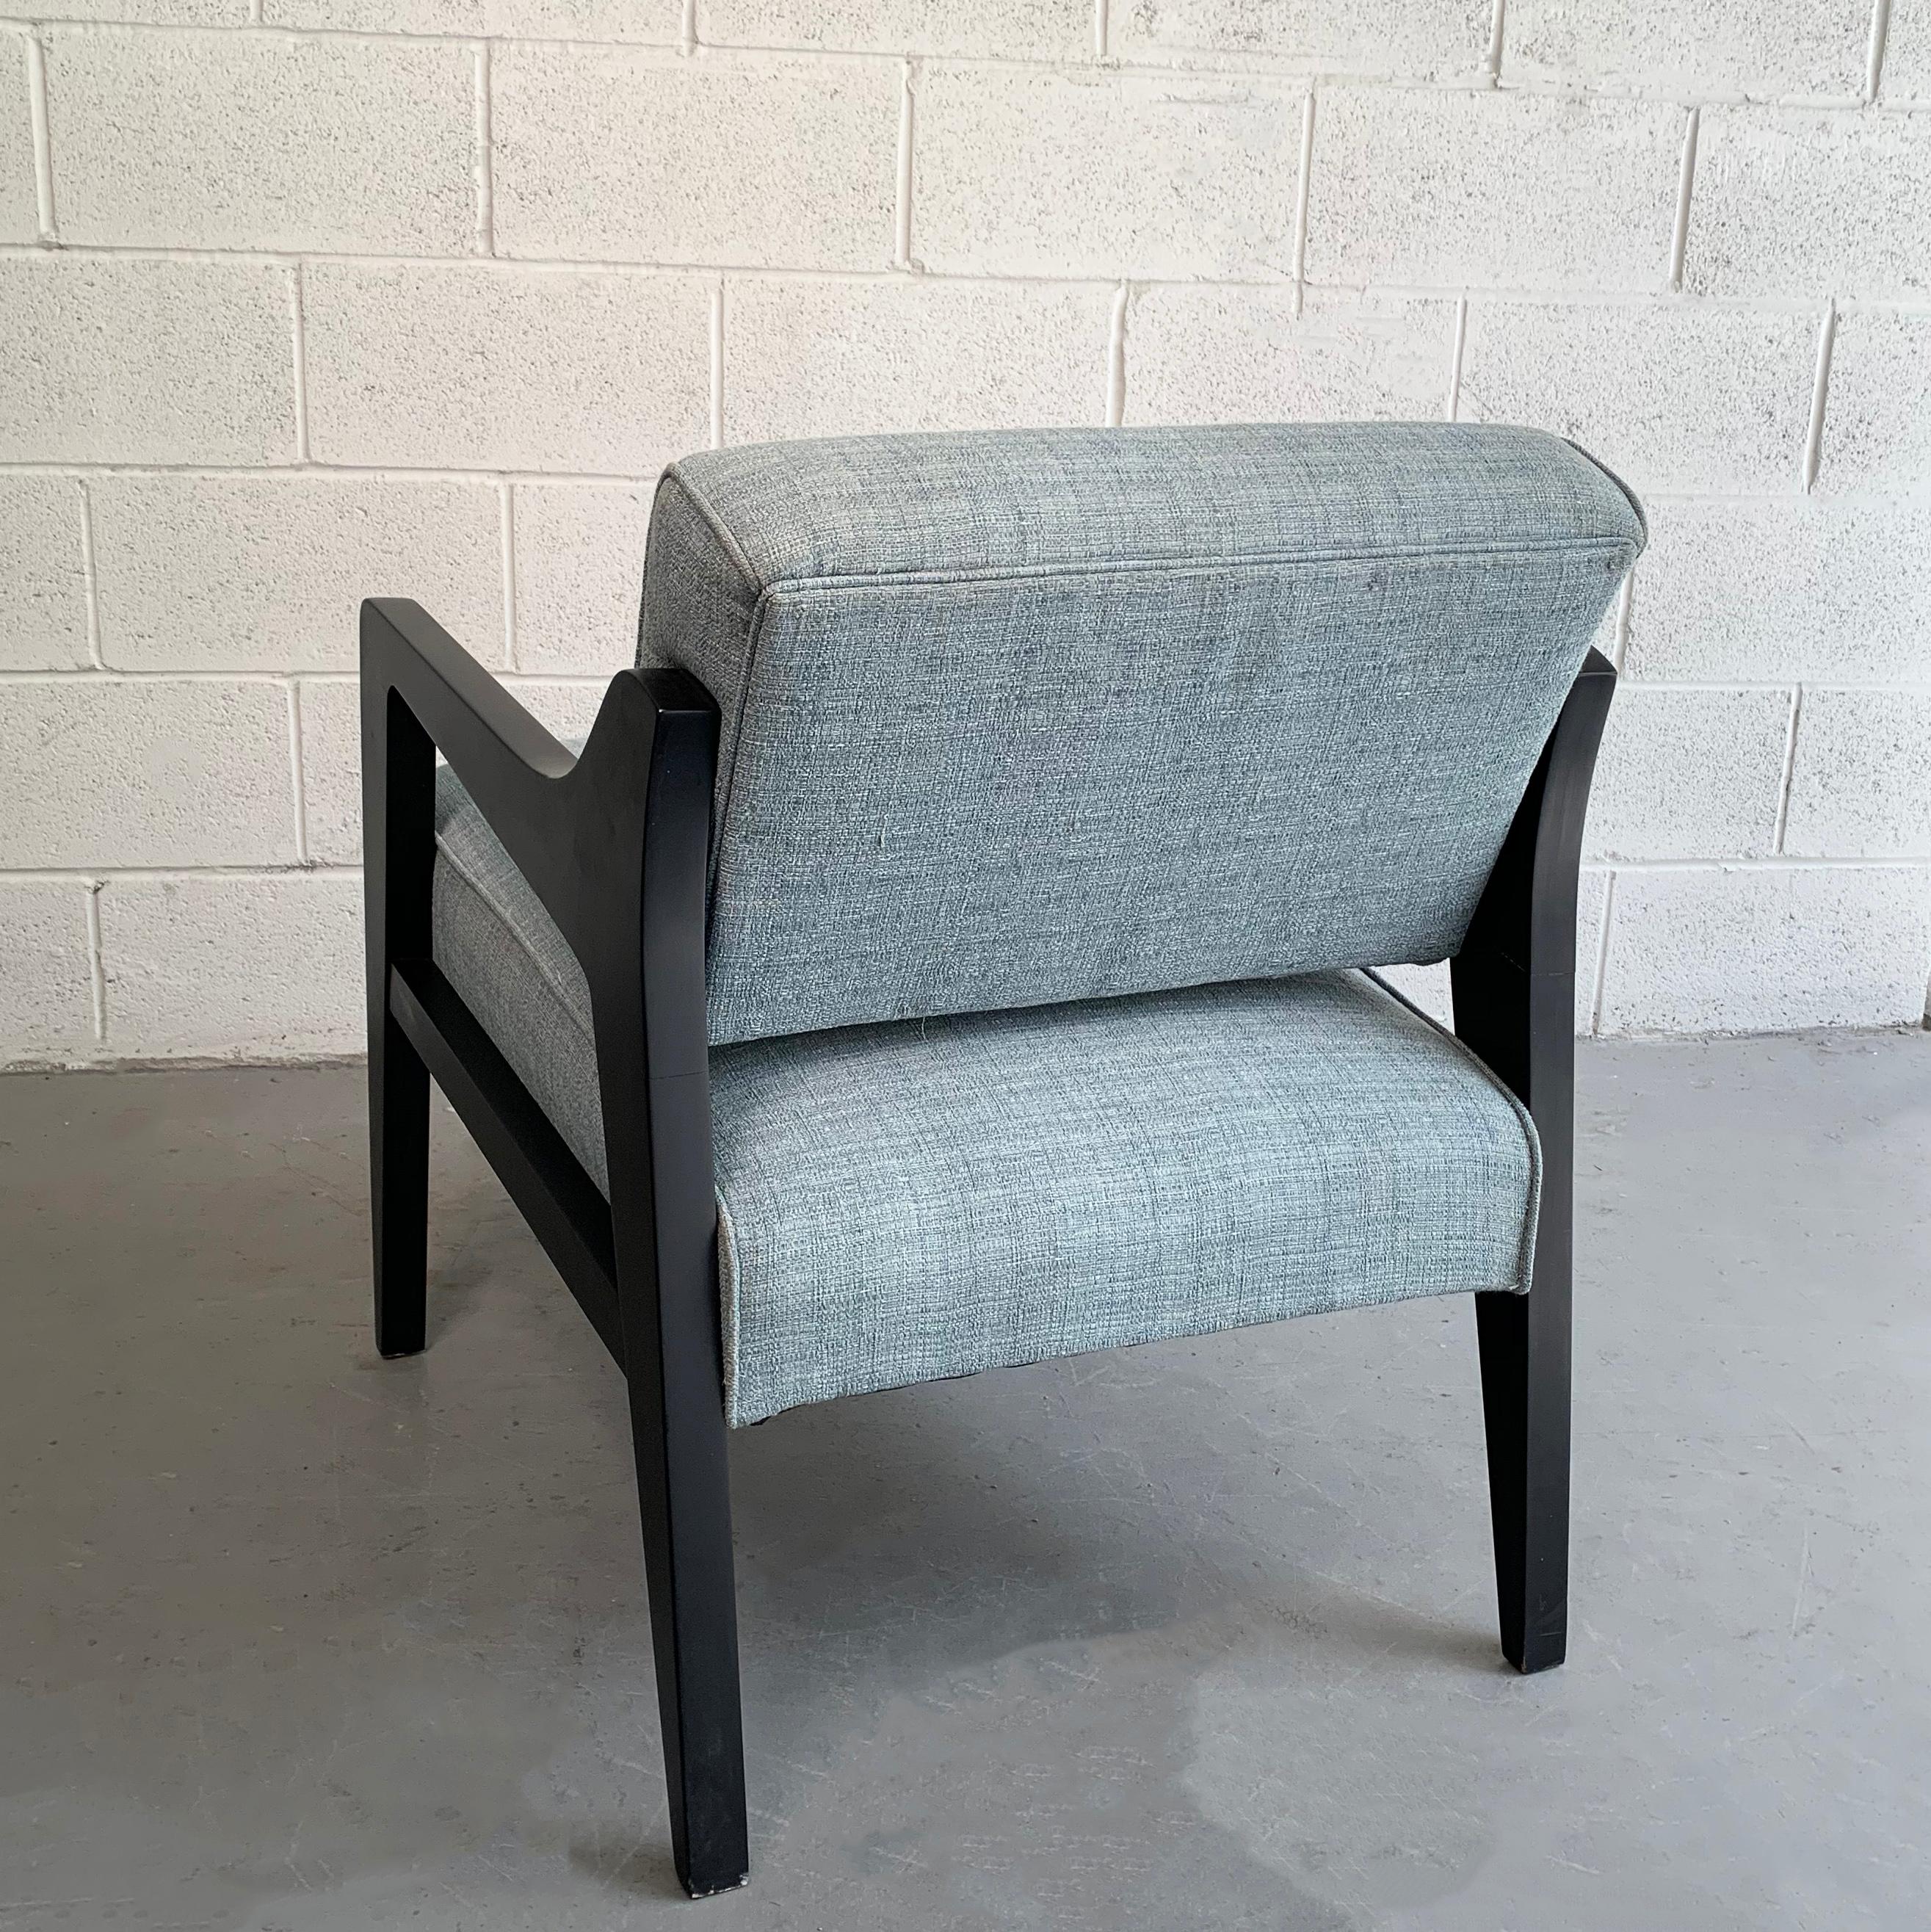 20th Century Black Lacquered Lounge Chair by Edward Wormley for Dunbar